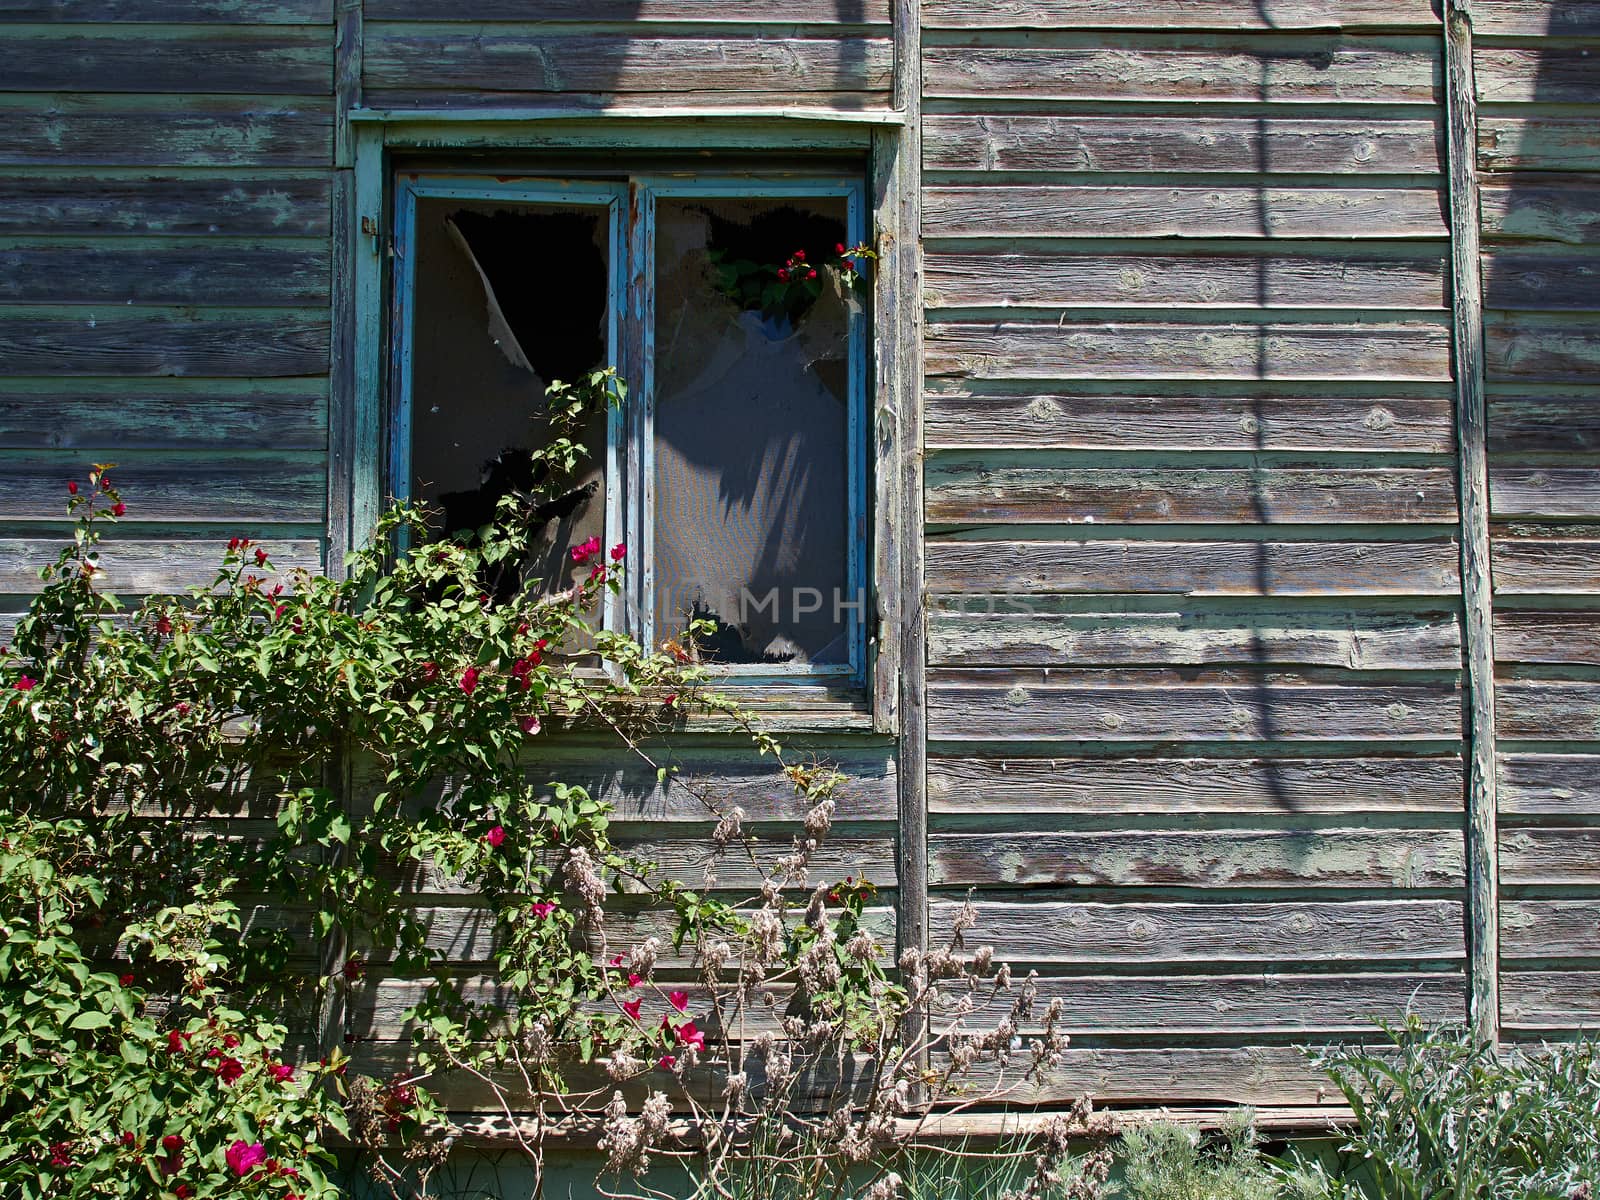 Details of an old weathered abandoned western colonial style wooden house shed